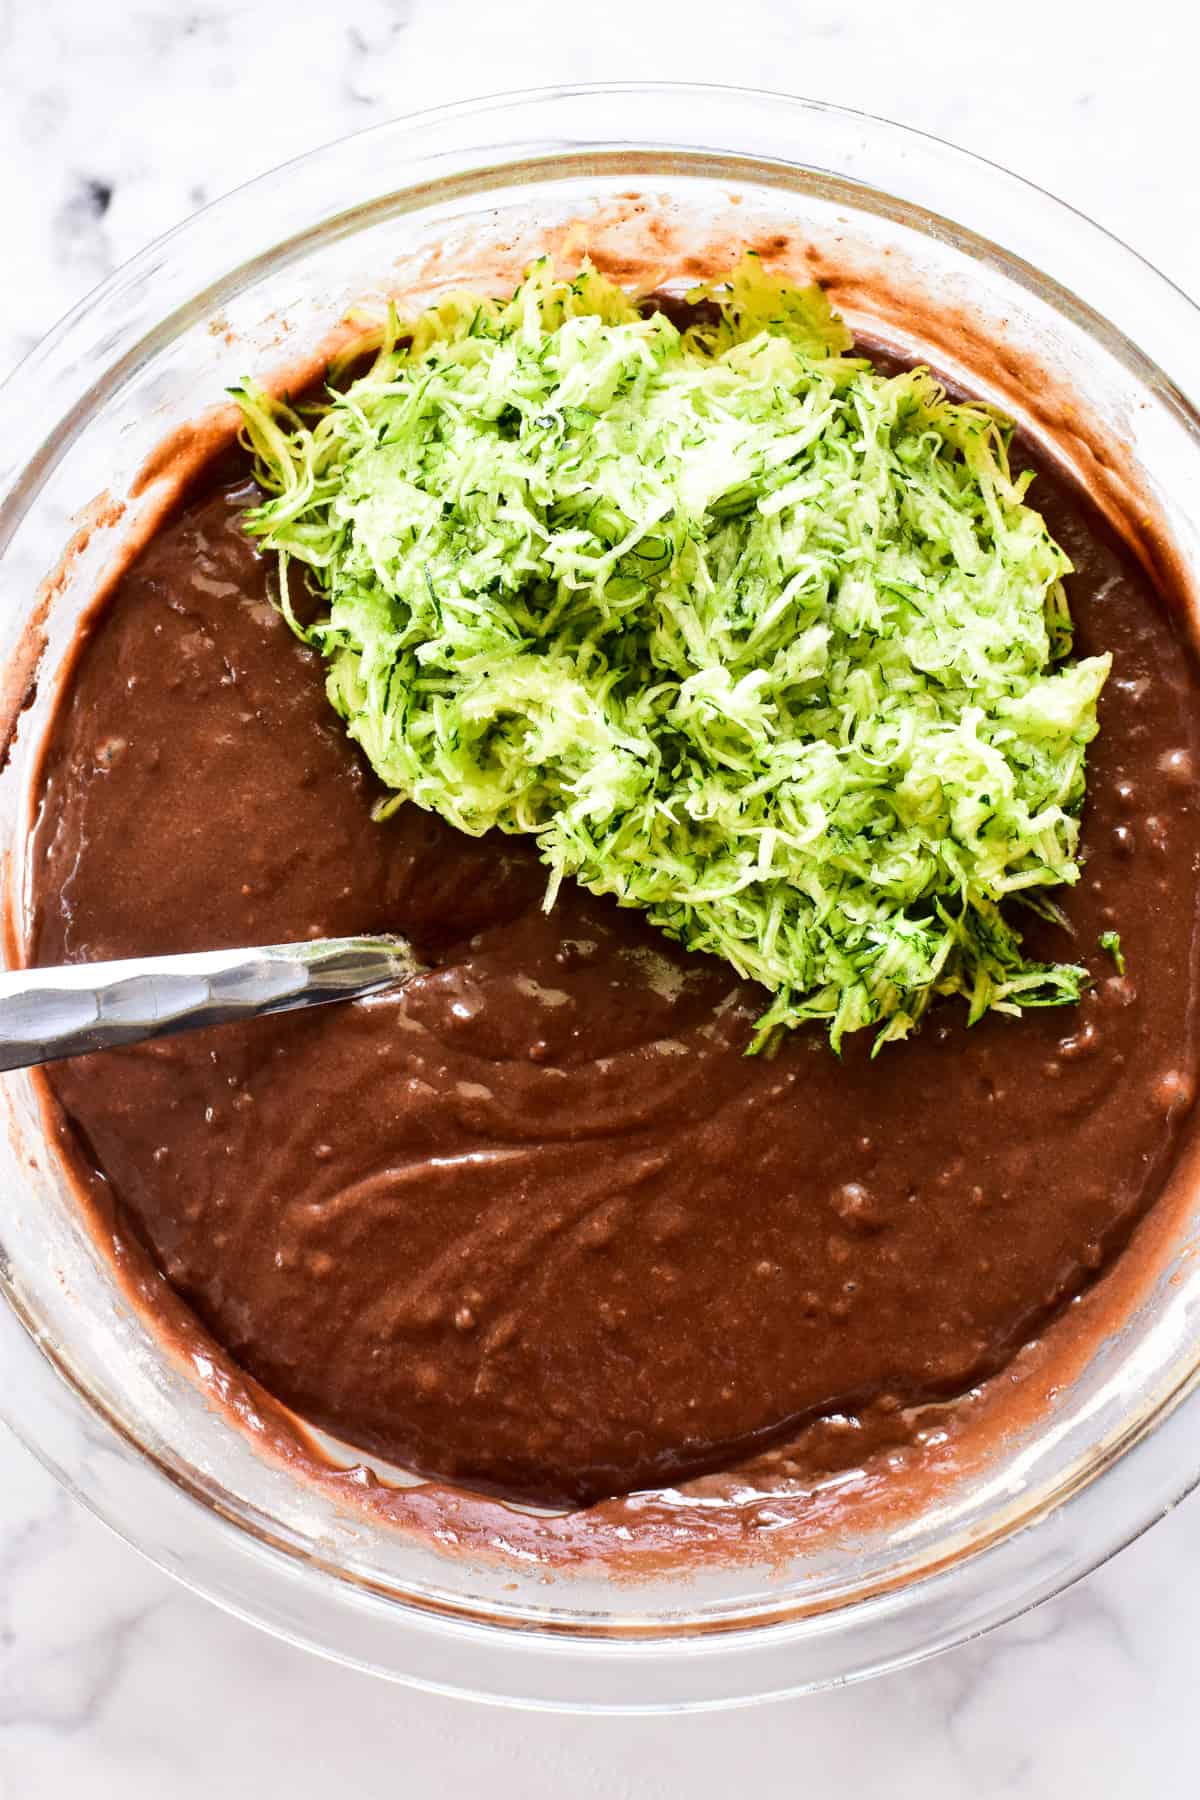 Chocolate Zucchini Bread batter in a mixing bowl